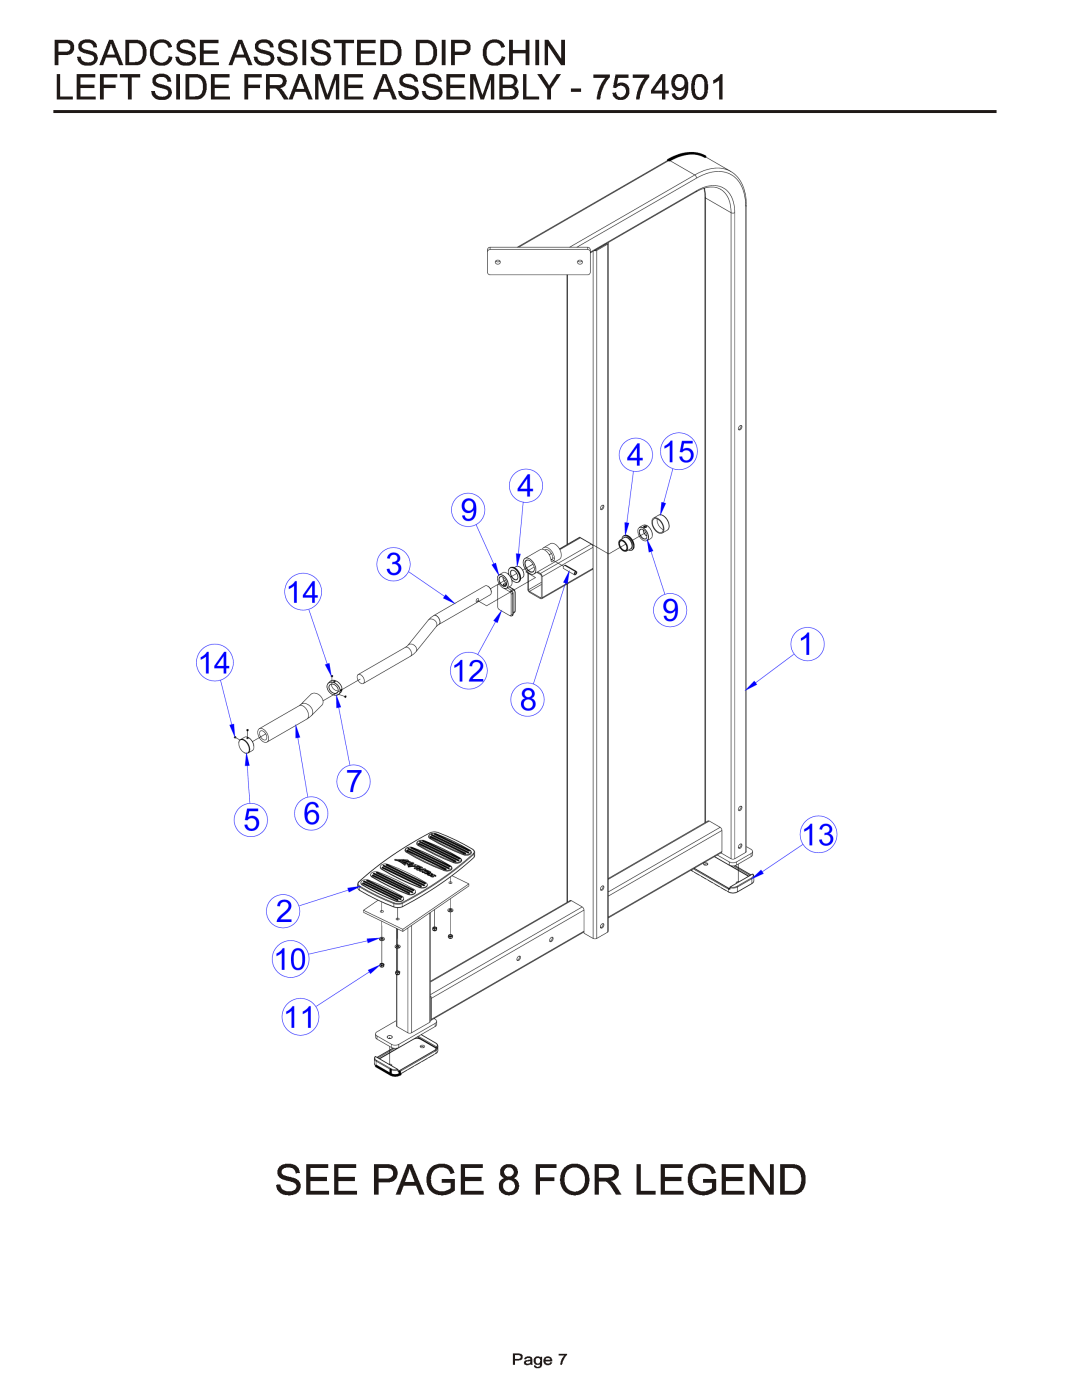 Life Fitness PSADCSE manual SEE PAGE 8 FOR LEGEND, Psadcse Assisted Dip Chin Left Side Frame Assembly, Page 